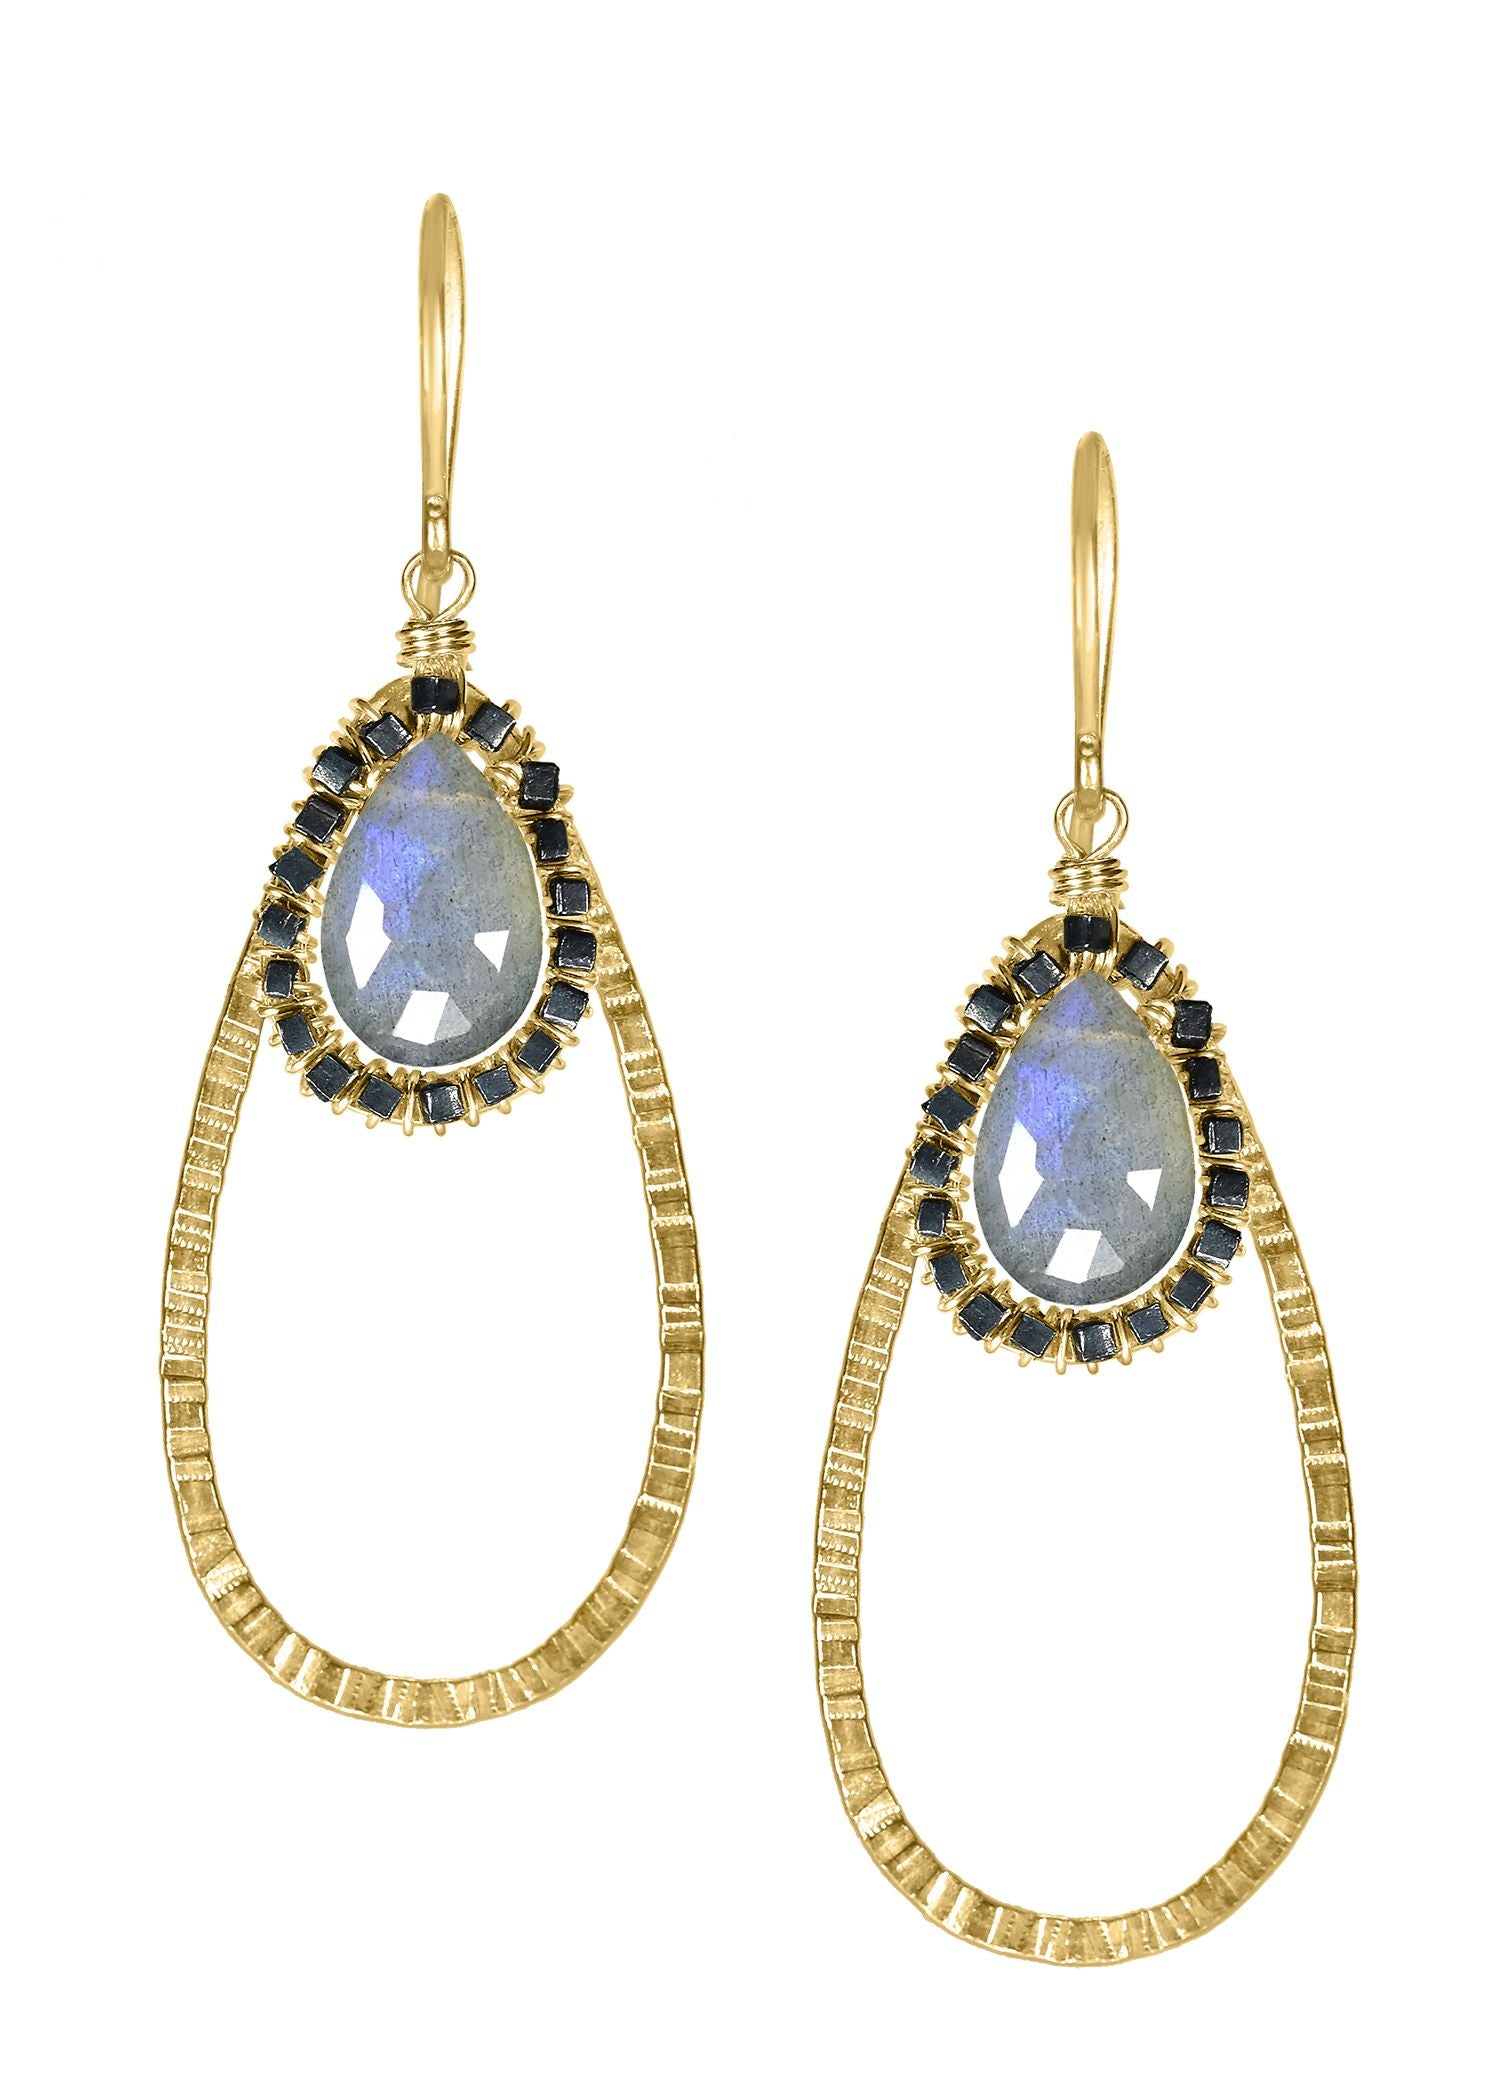 Labradorite 14k gold fill Blackened sterling silver Mixed metal Earrings measure 1-3/4" in length (including ear wires) and 1/2" in width Handmade in our Los Angeles studio